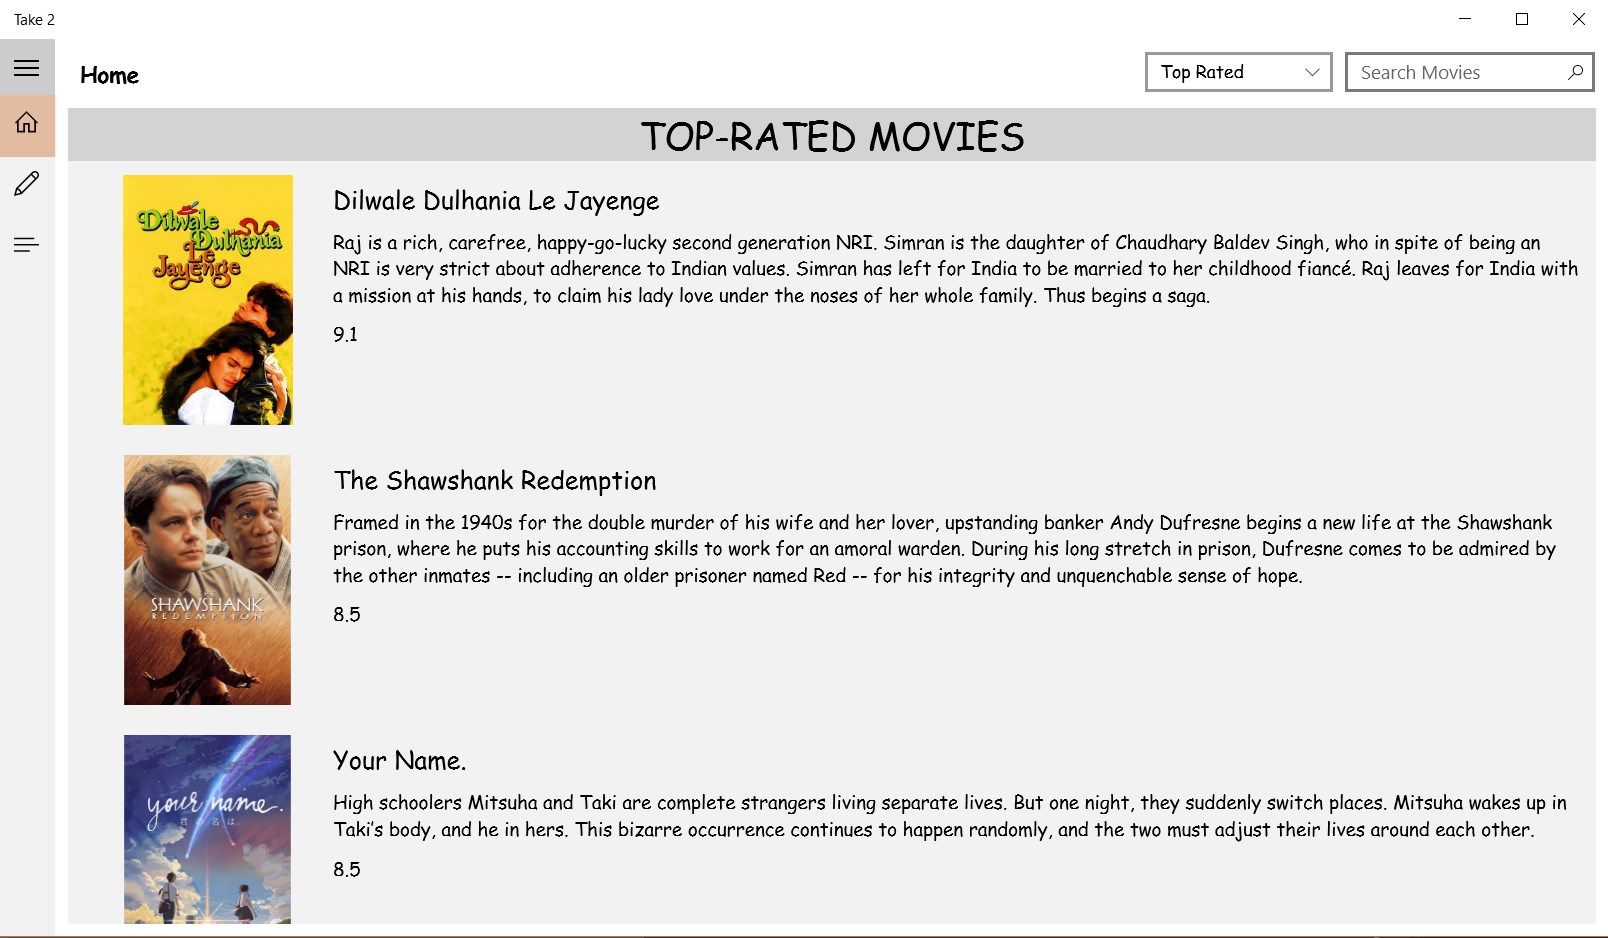 Home Page - Filter Movies by Top Rated, Popular and Upcoming